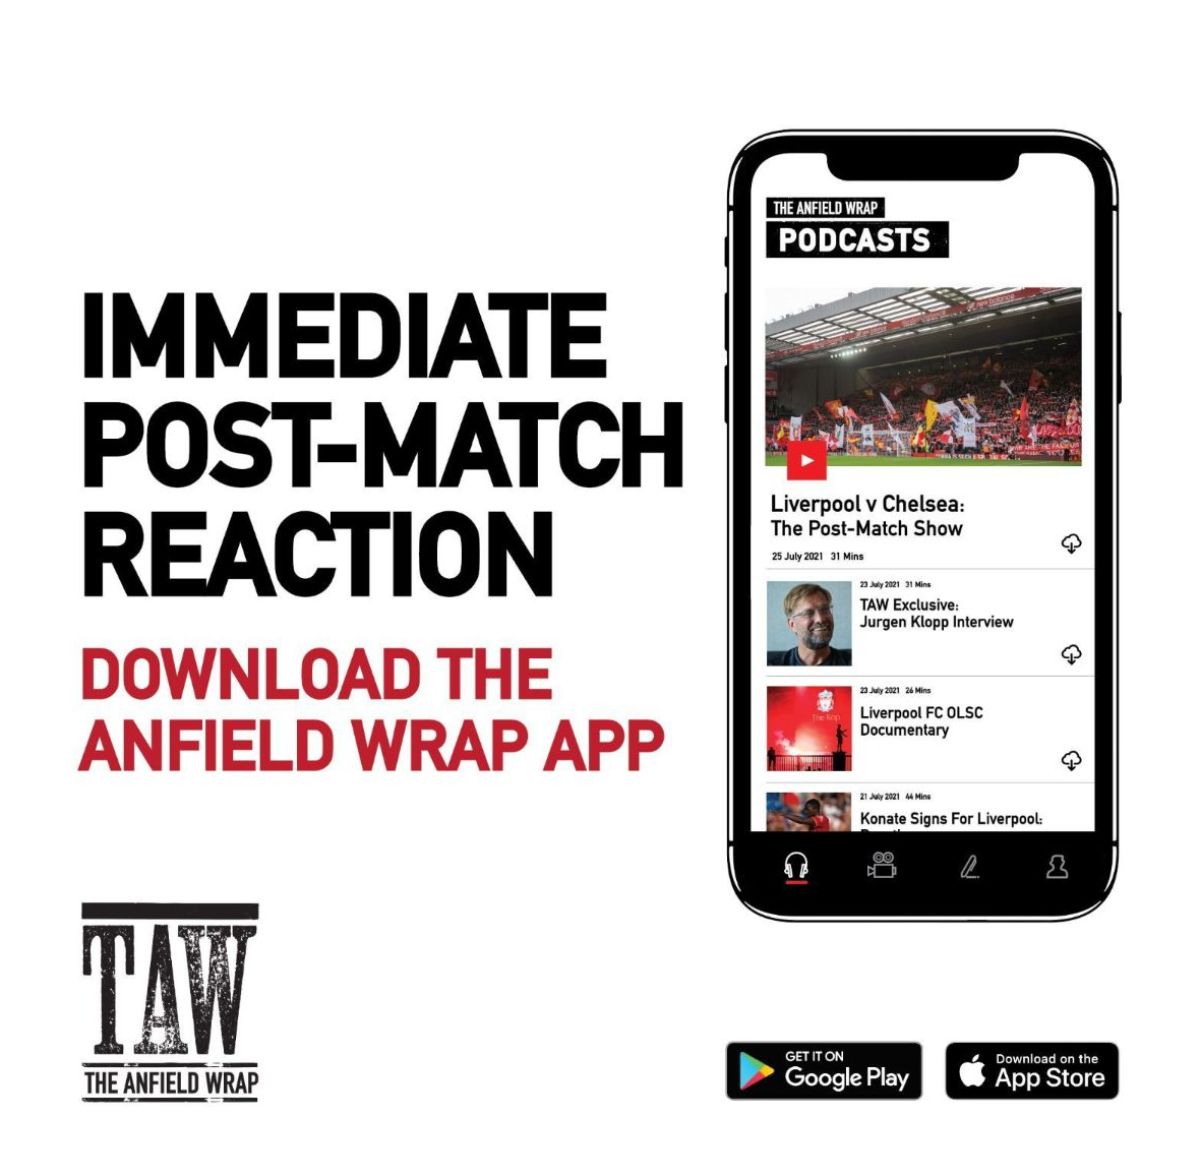 The Anfield Wrap App